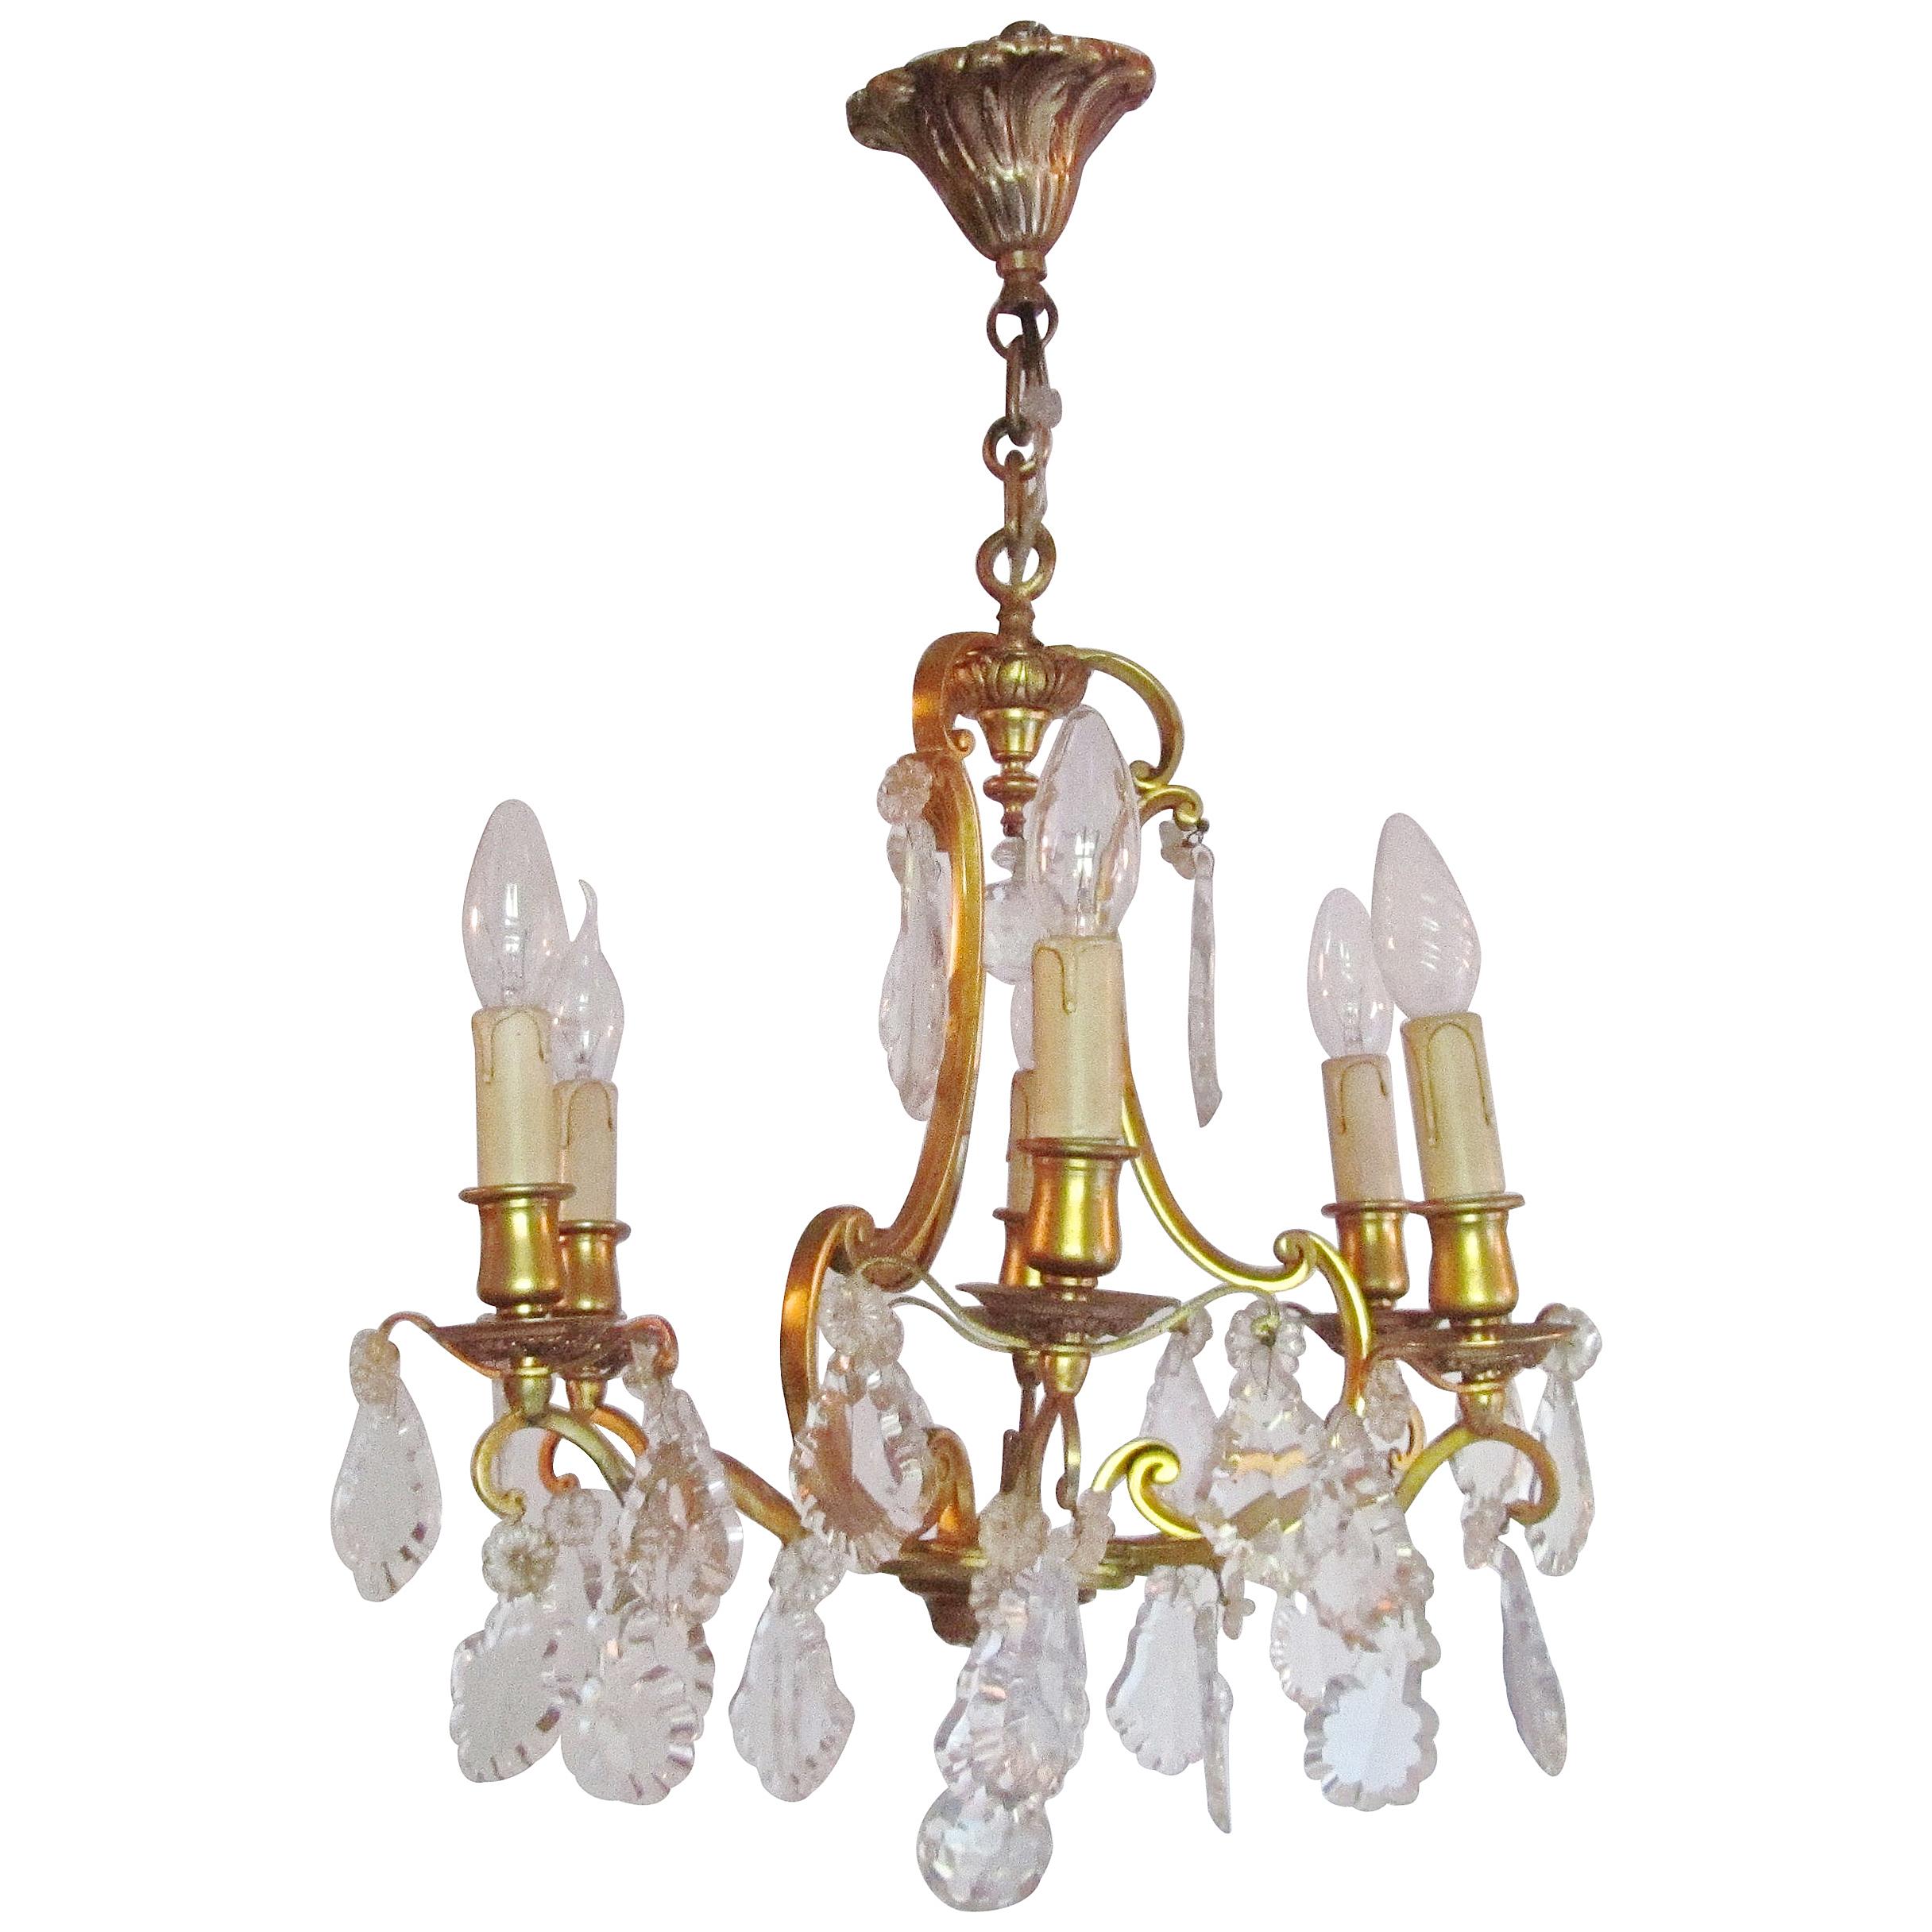 Charming French Cut Glass and Brass 6 Branch Chandelier For Sale